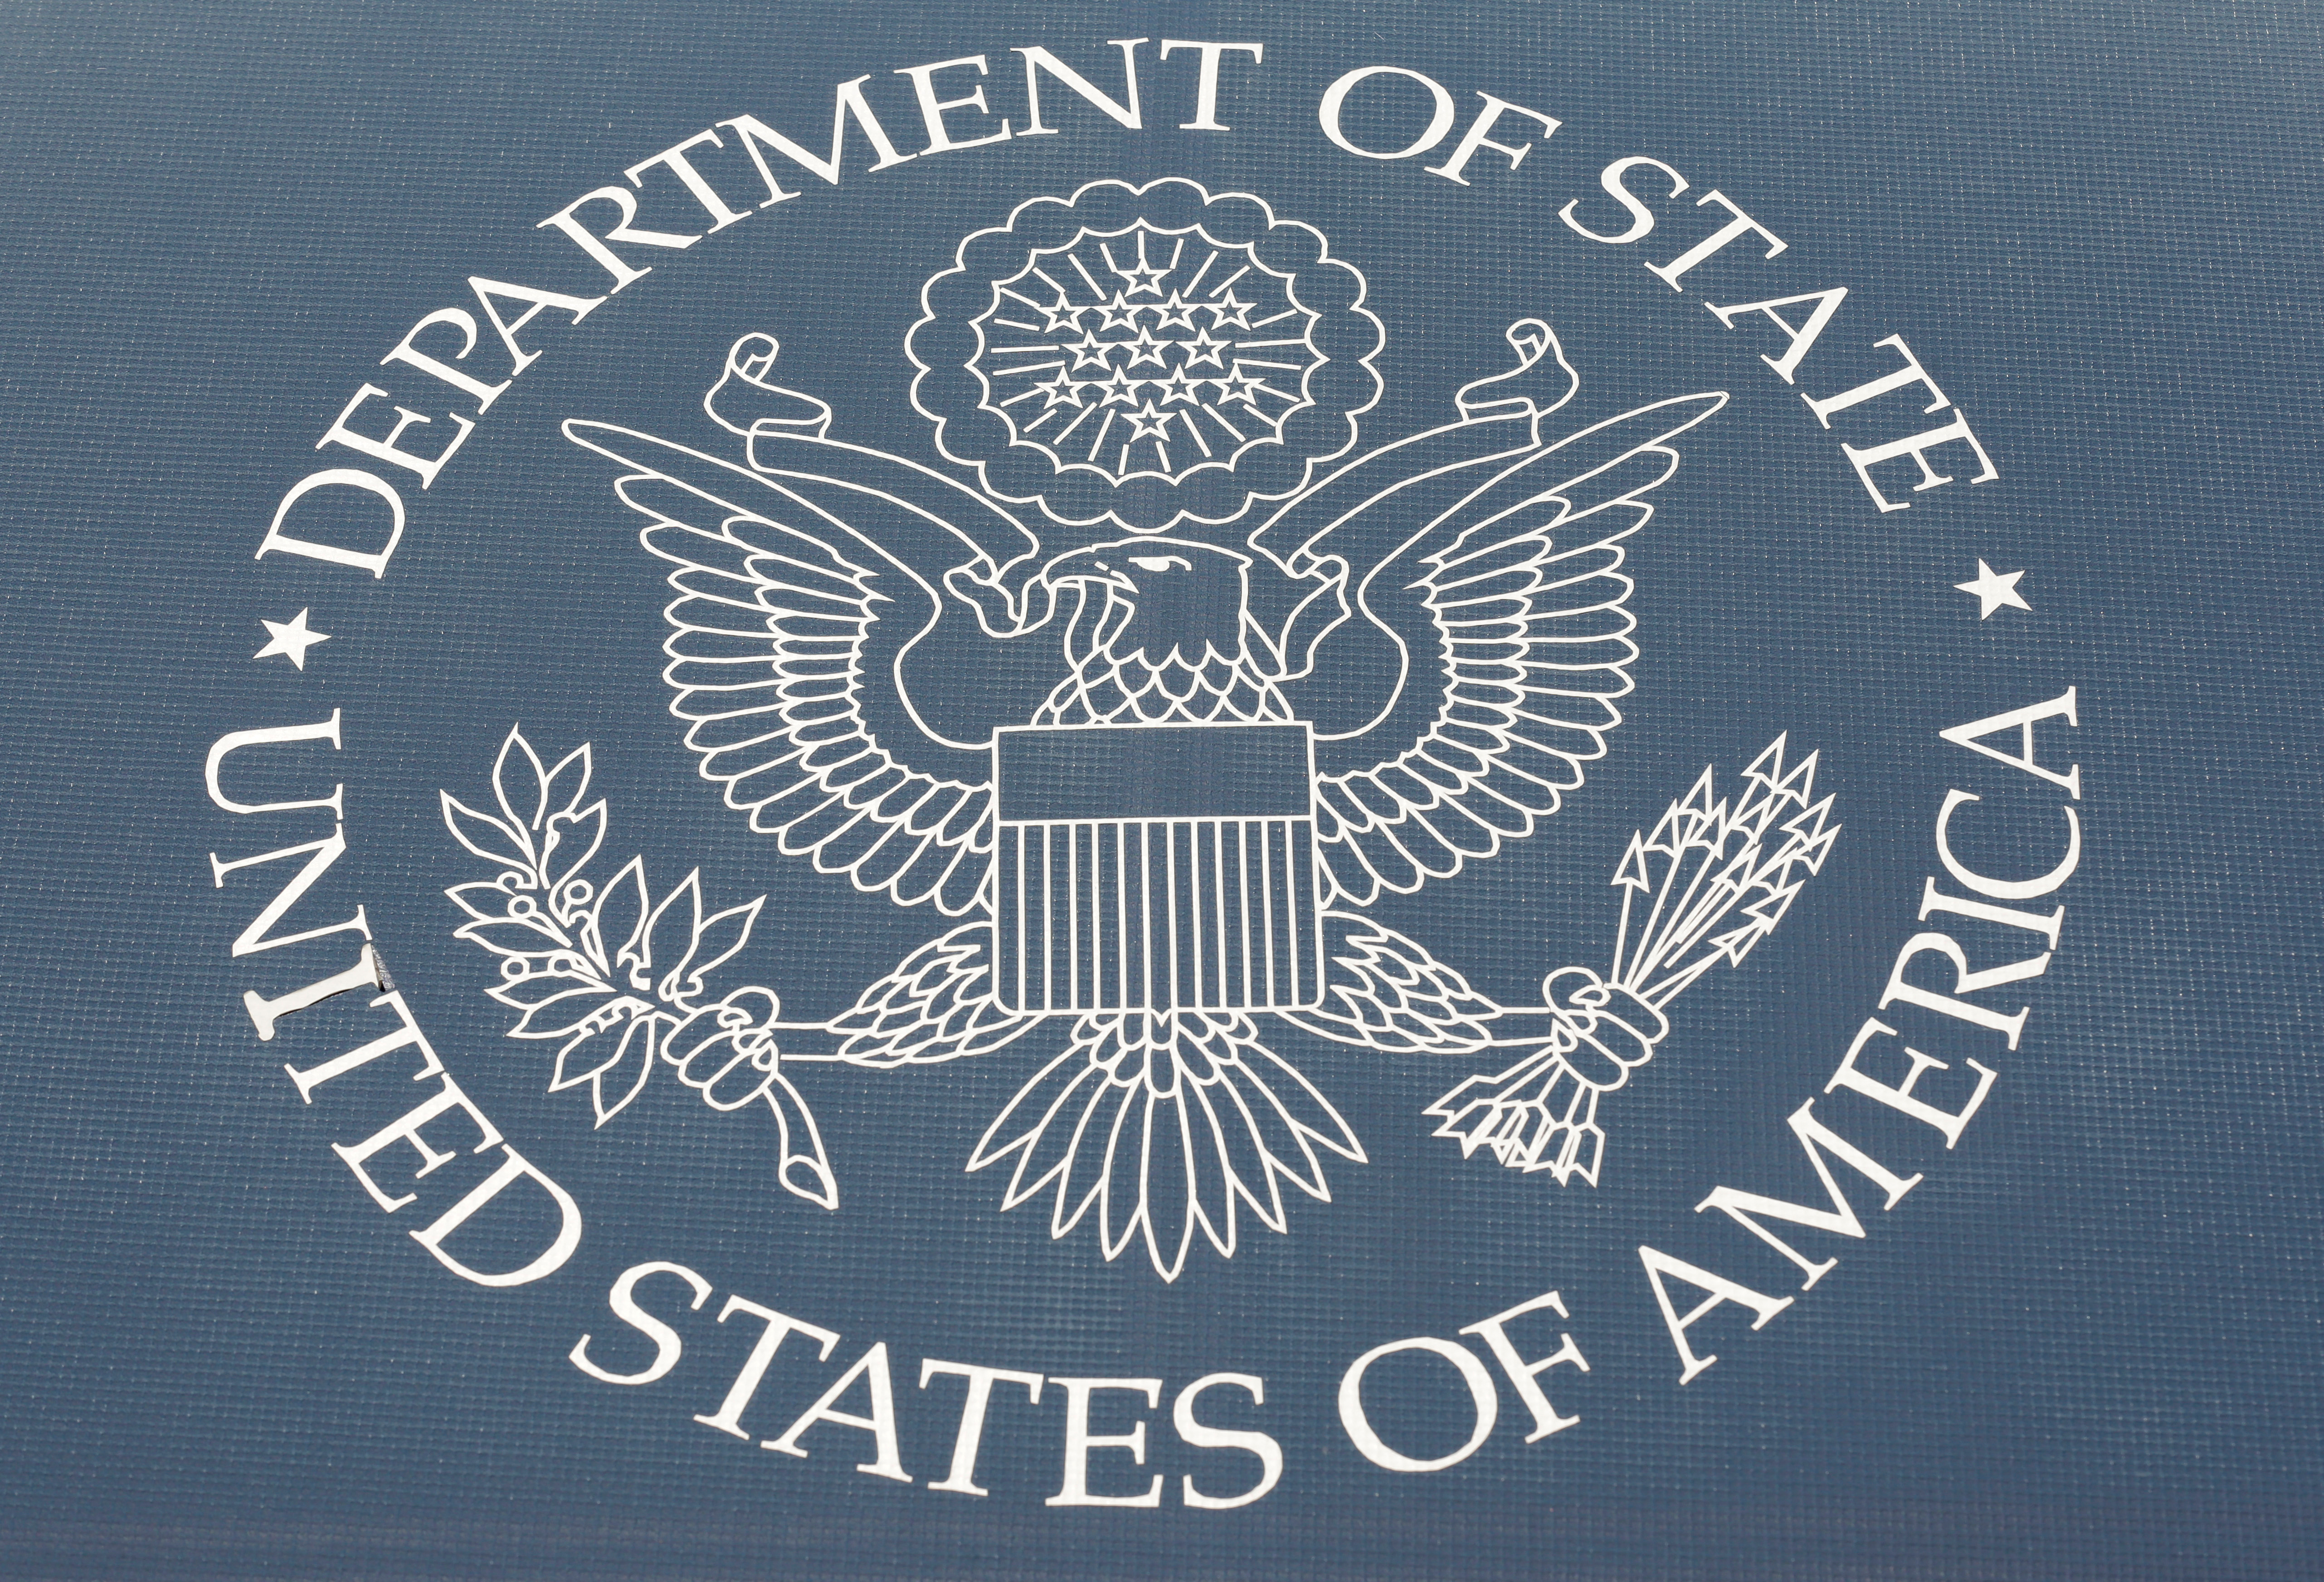 The seal of the United States Department of State is shown in Washington